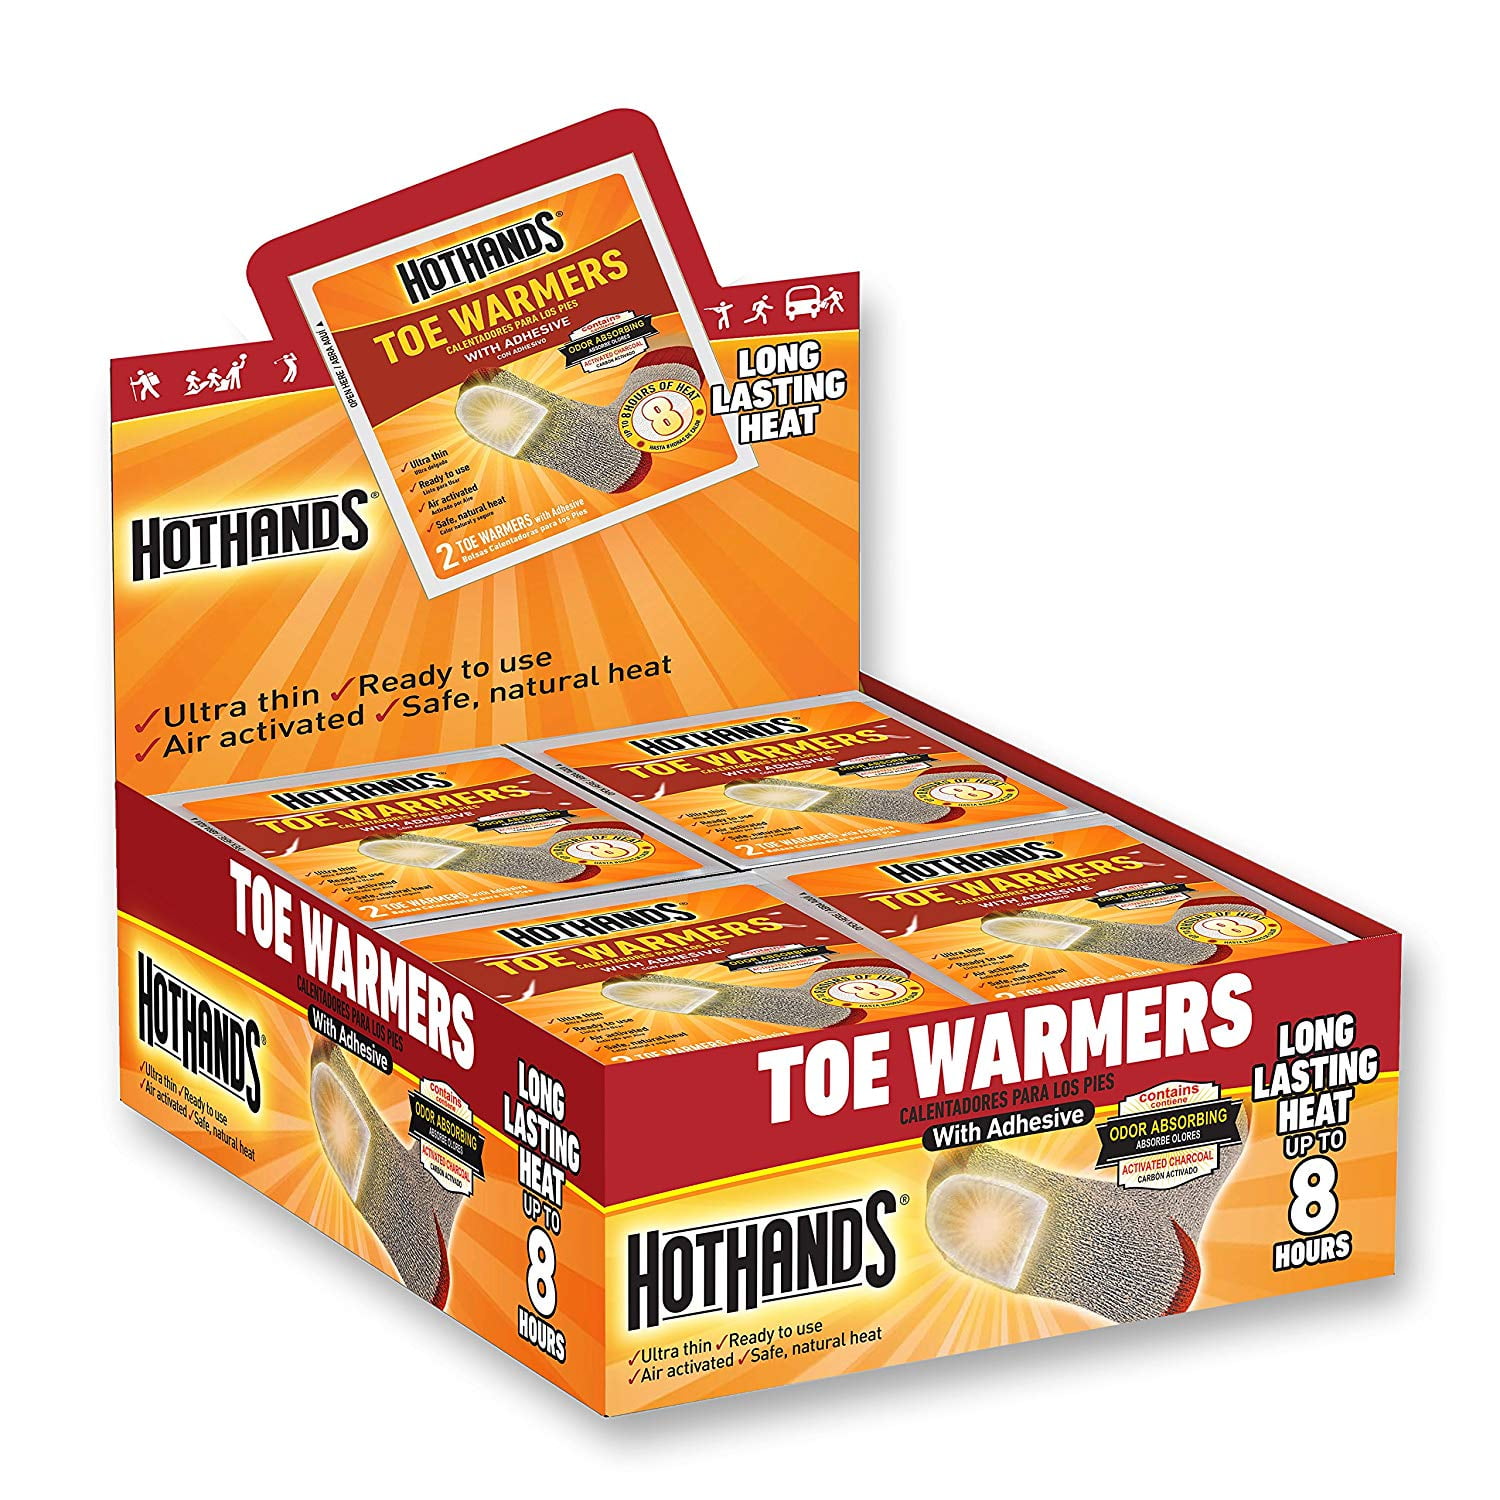 Hot Hands Hand Warmers Long Heat Up to 10 Hours Lot of 20 Pairs 40 Warmers NEW 